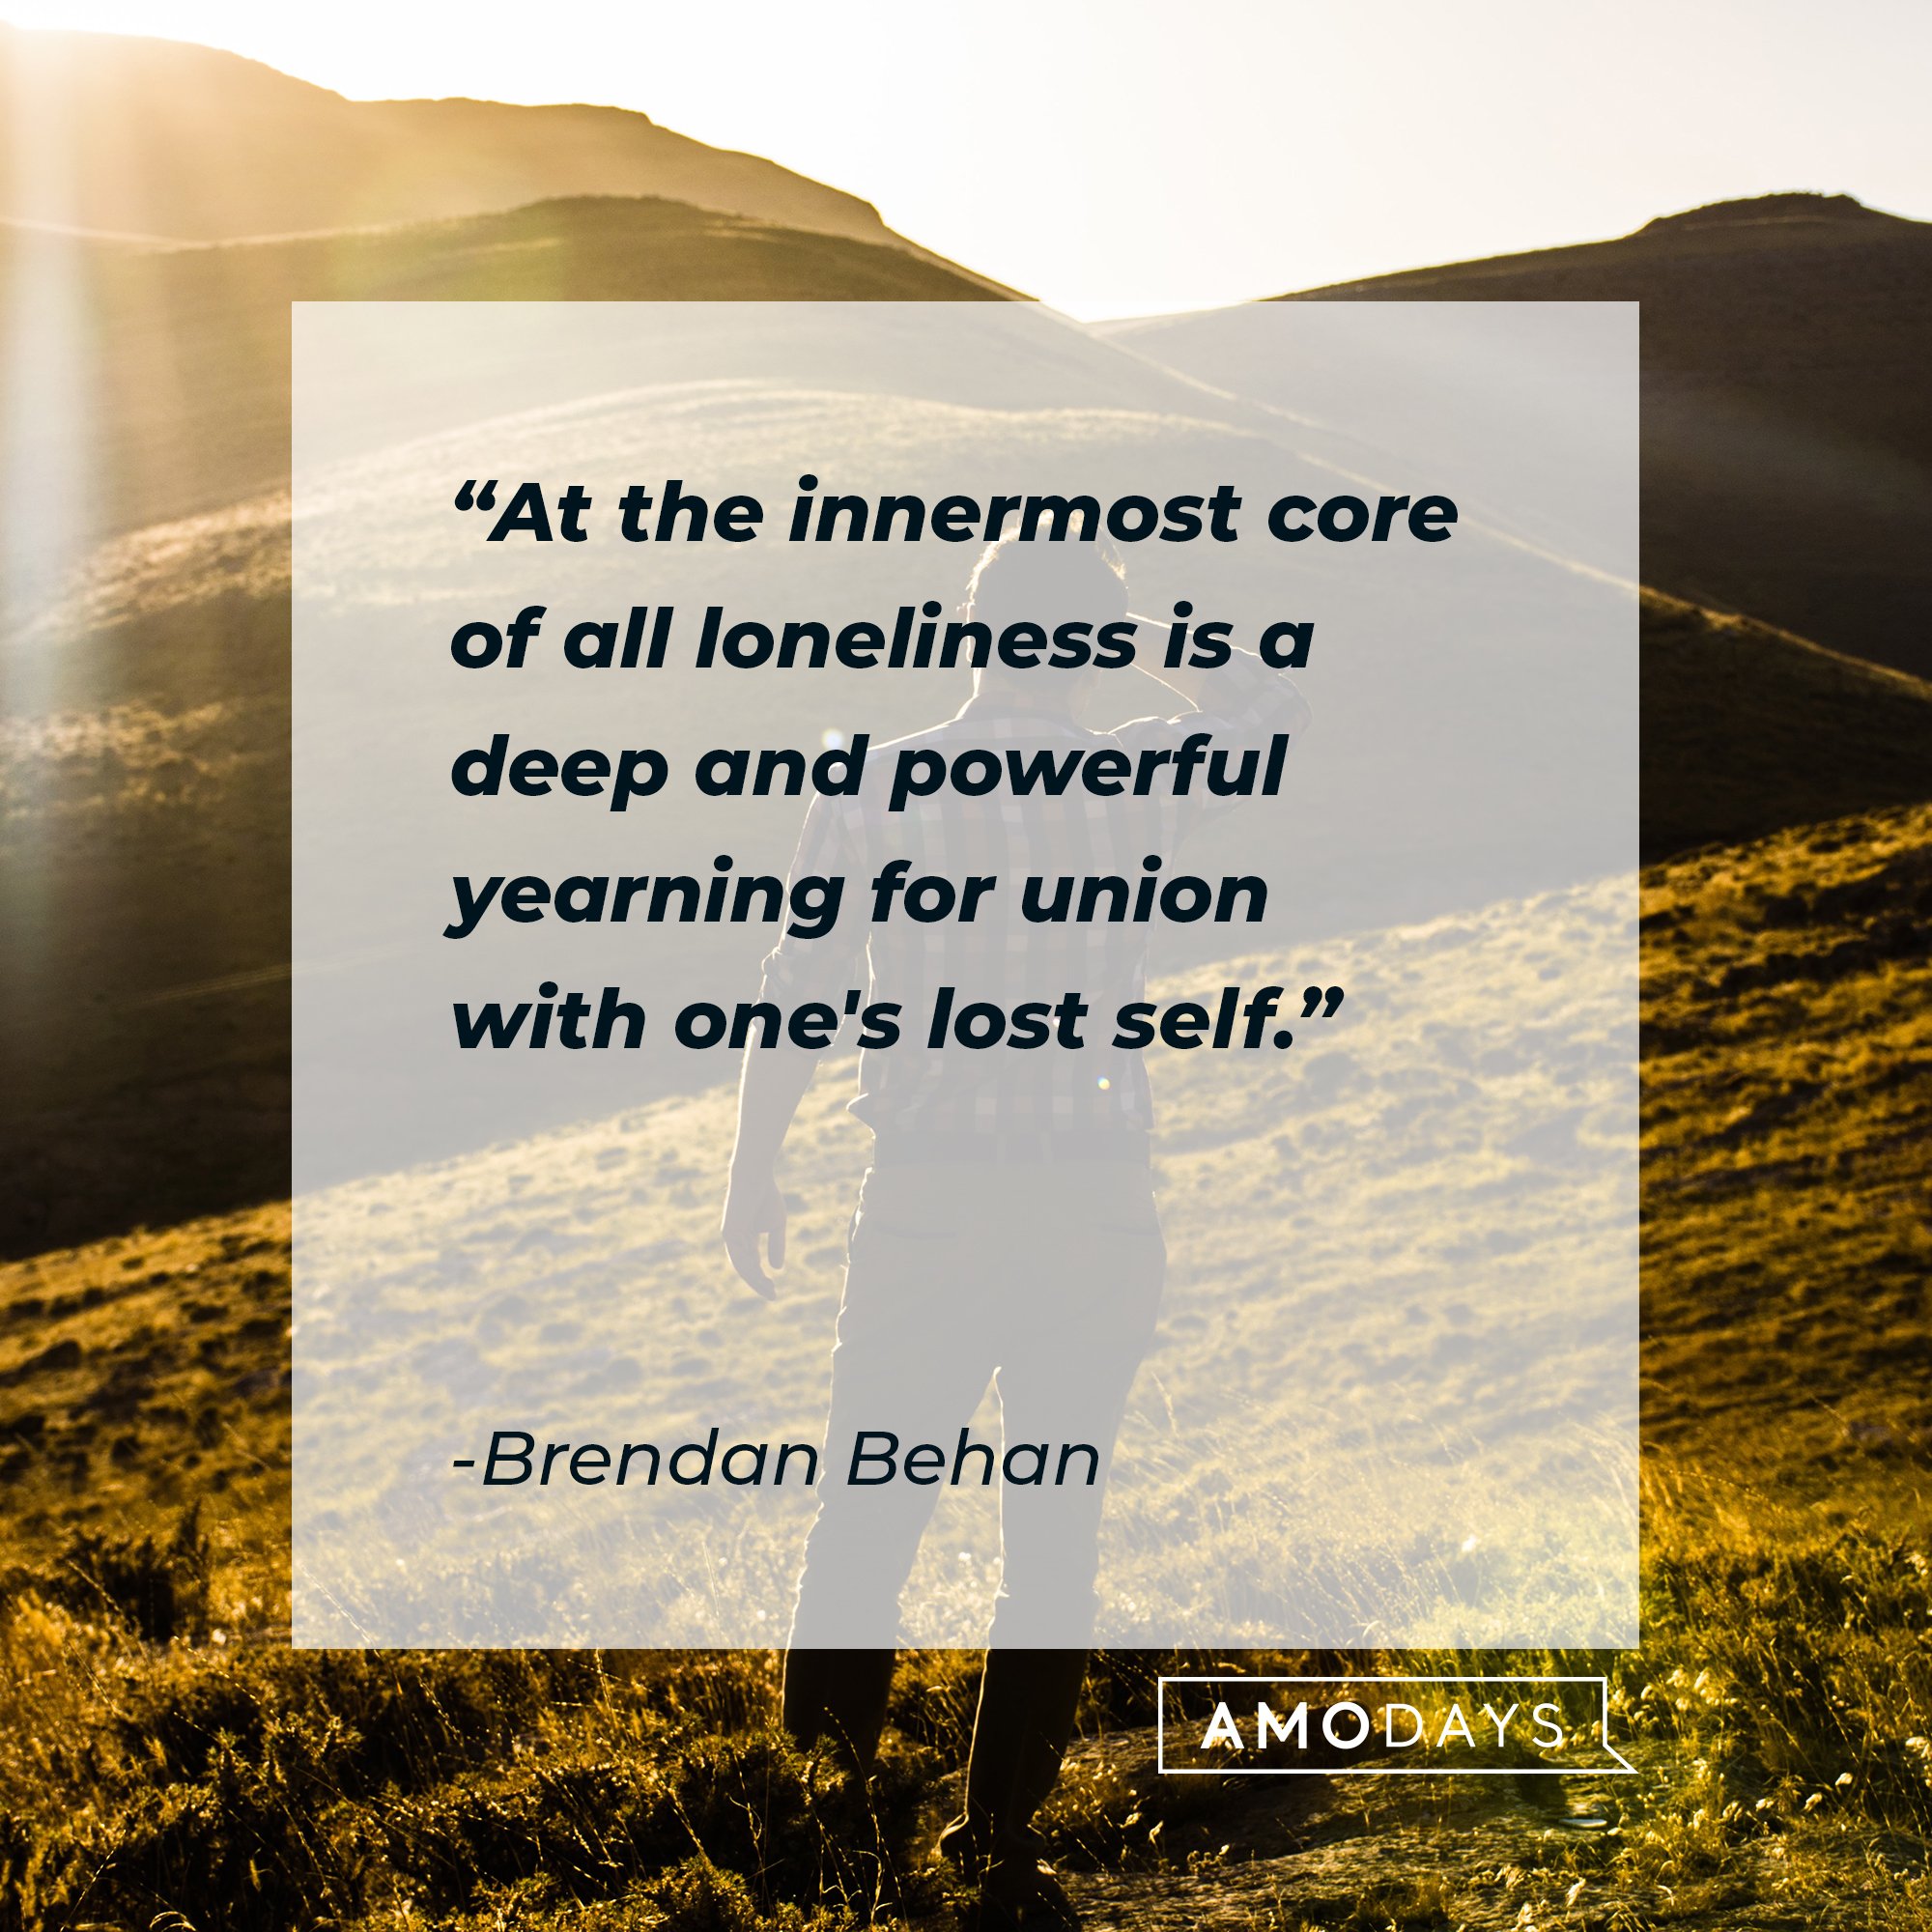 Brendan Behan’s quote: “At the innermost core of all loneliness is a deep and powerful yearning for union with one's lost self.” | Image: AmoDays